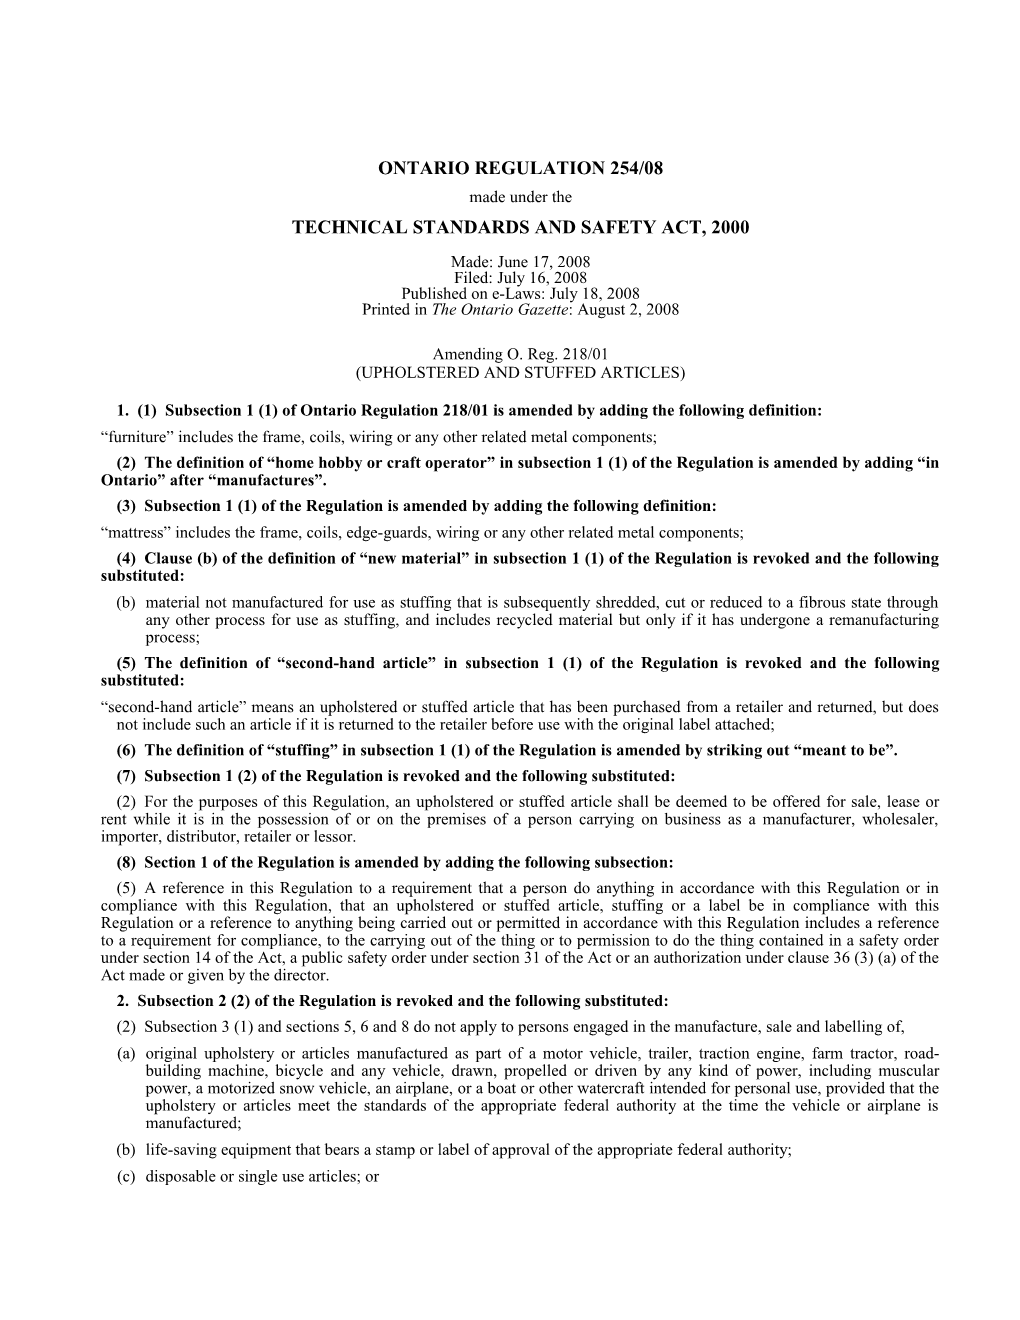 TECHNICAL STANDARDS and SAFETY ACT, 2000 - O. Reg. 254/08